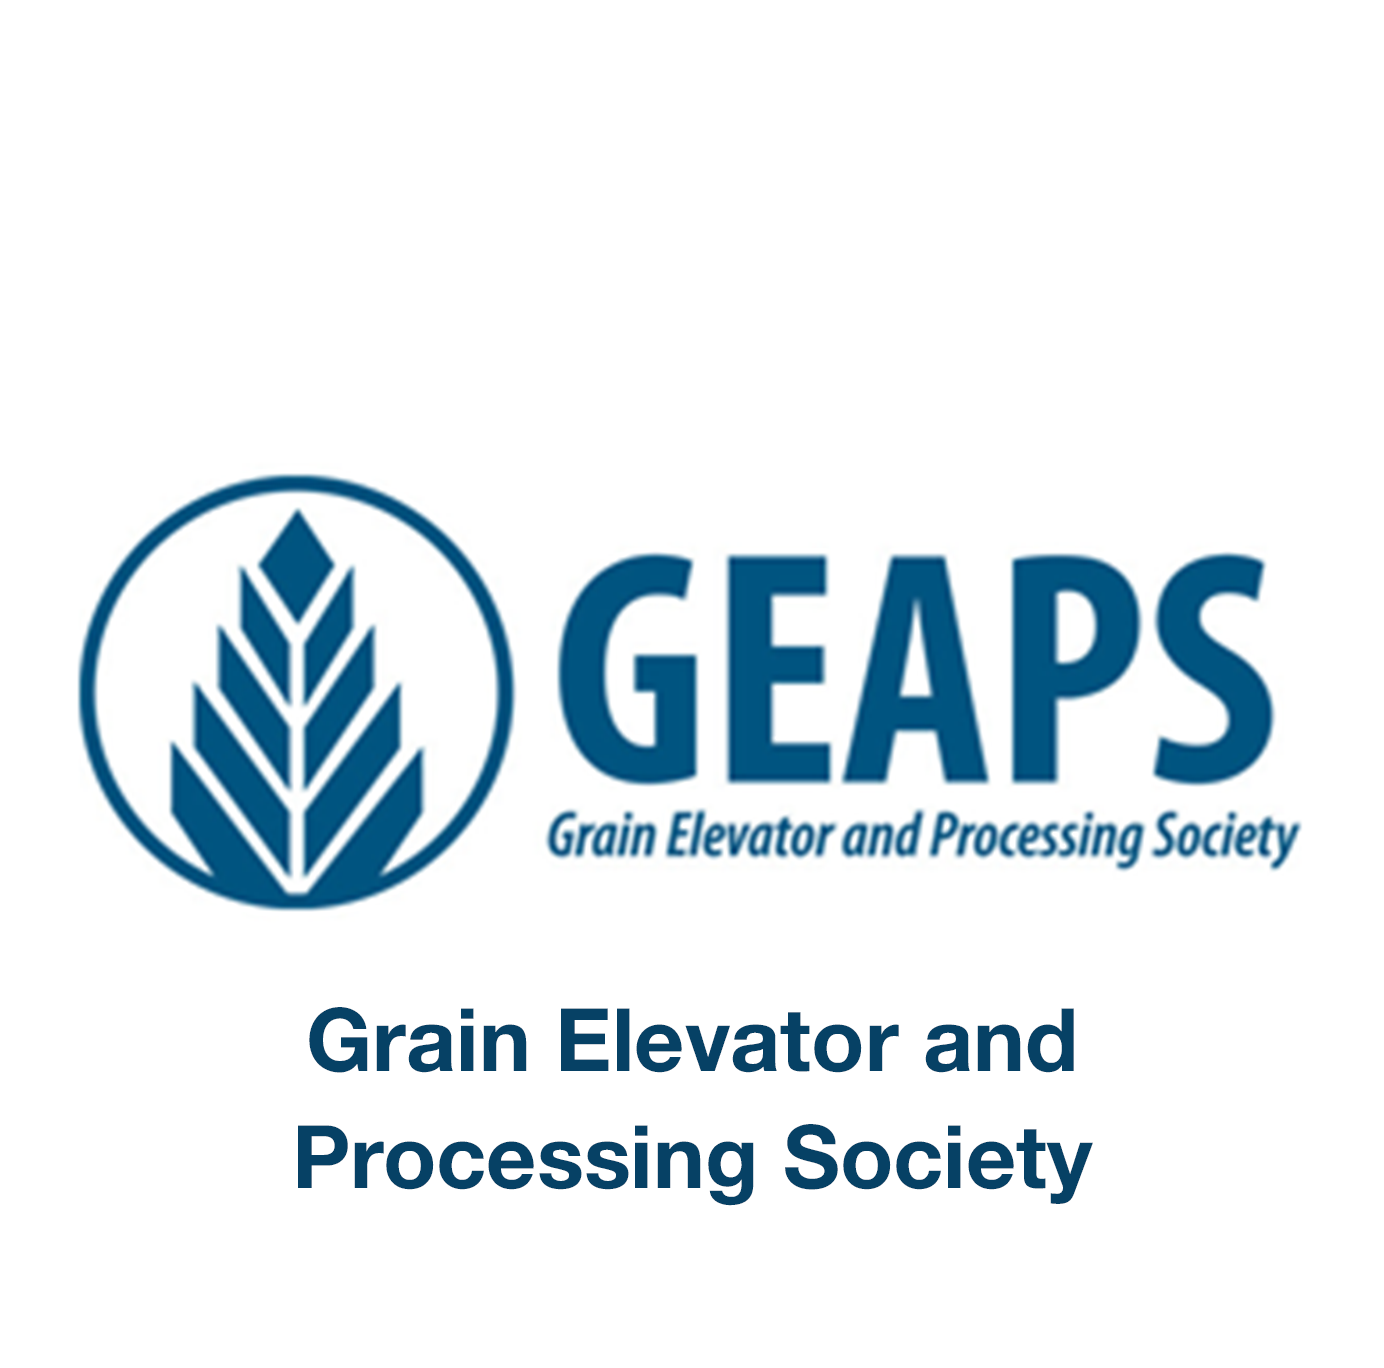 GEAPS (Grain Elevator and Processing Society)